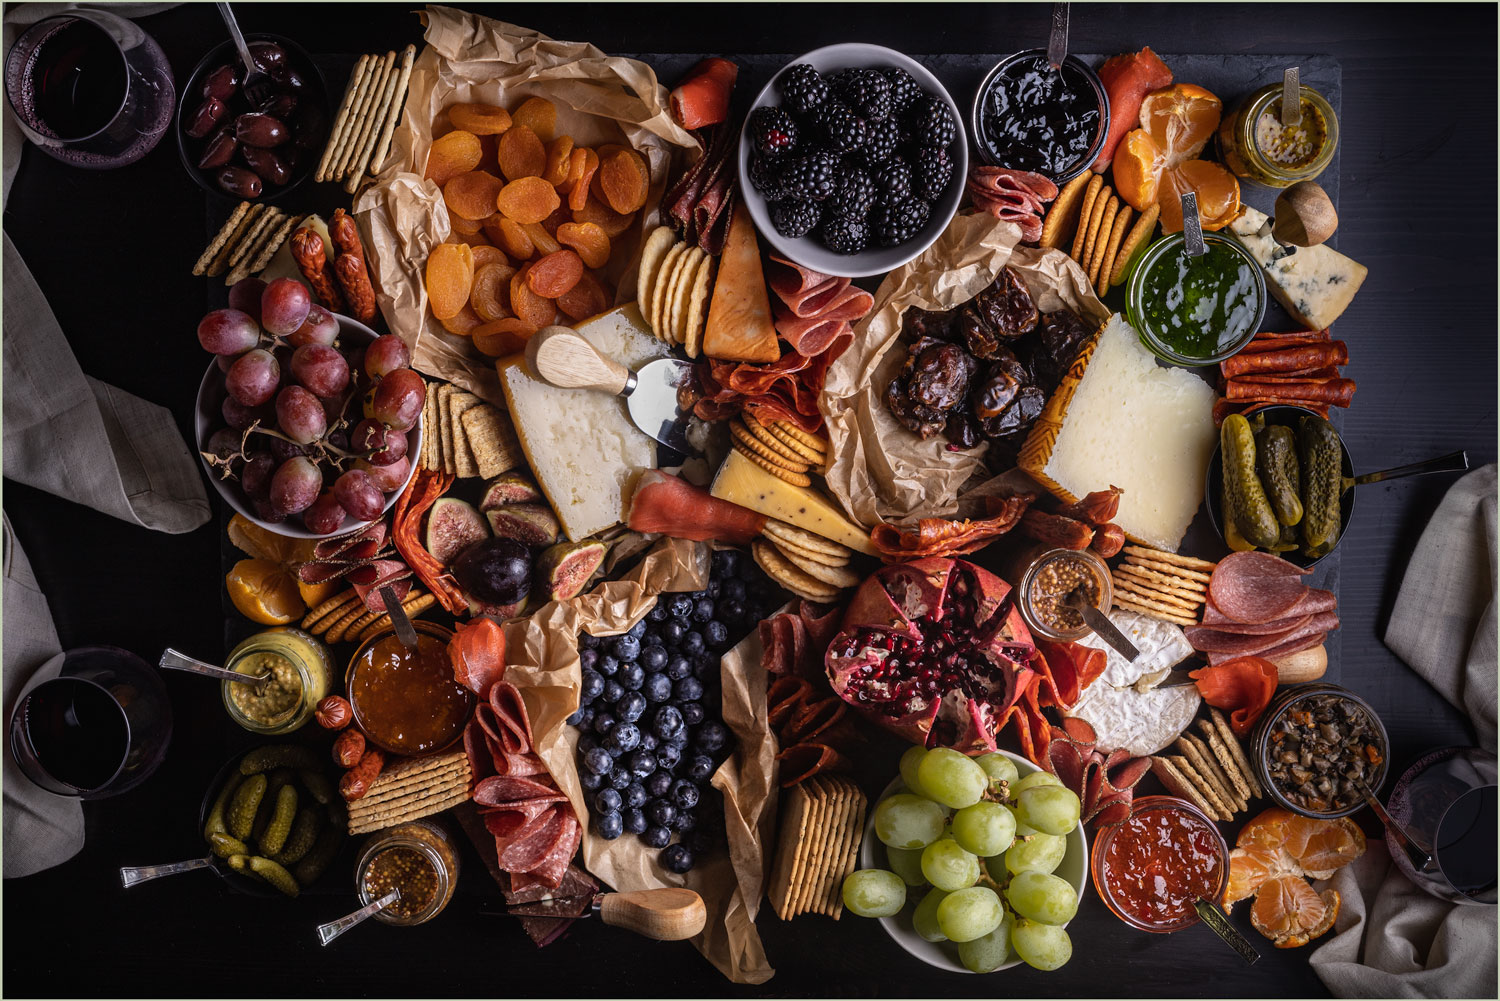 A giant charcuterie board with a variety of cured meats, cheeses, fruits, crackers and spreads.